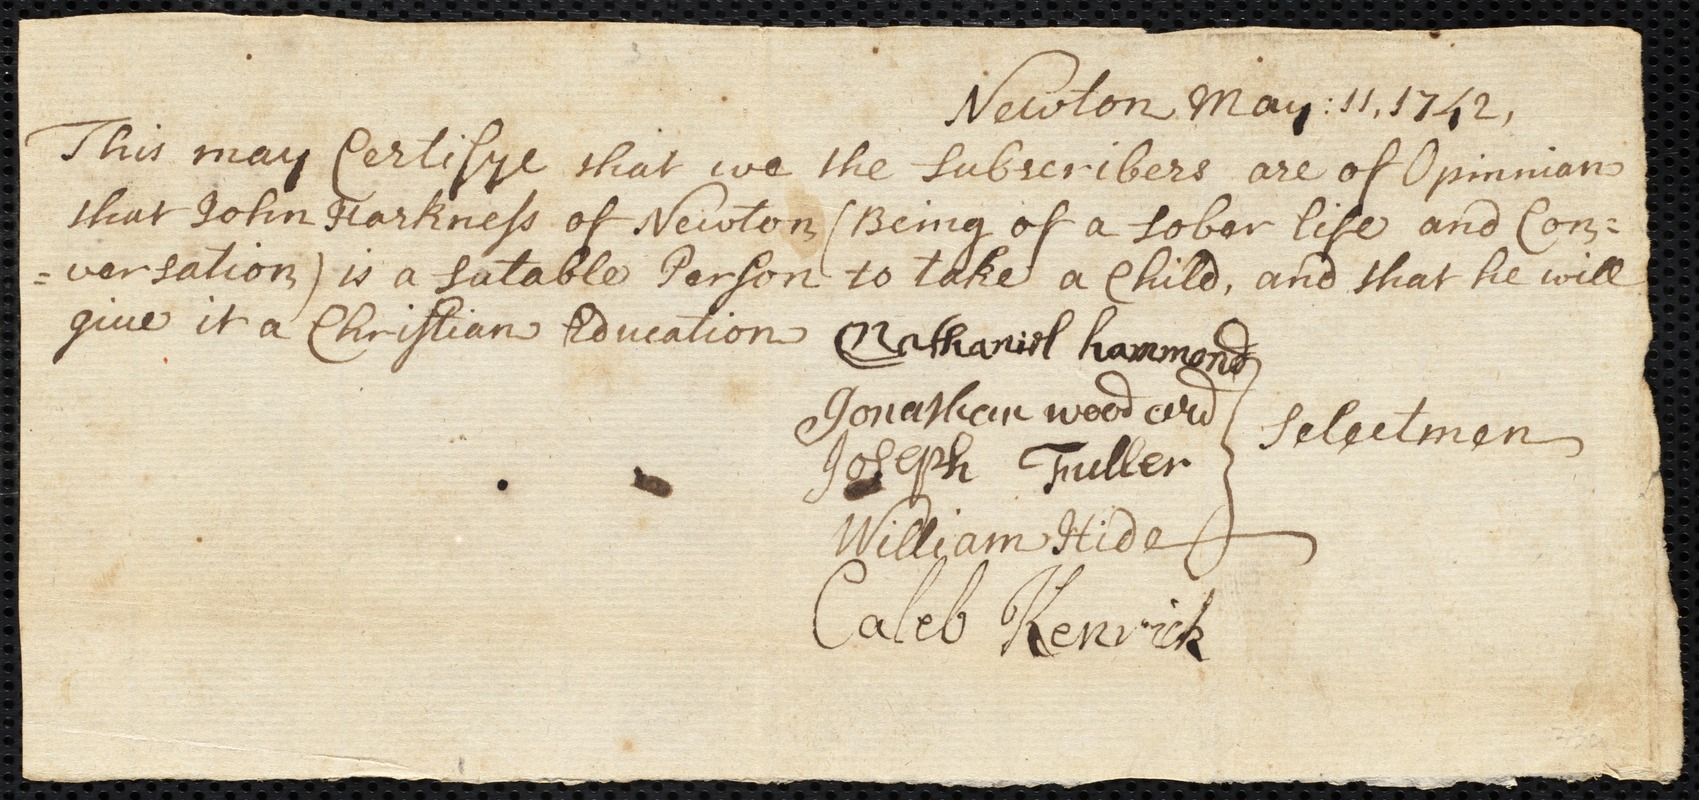 Easter Smith indentured to apprentice with John Harkness of Newton, 2 June 1742